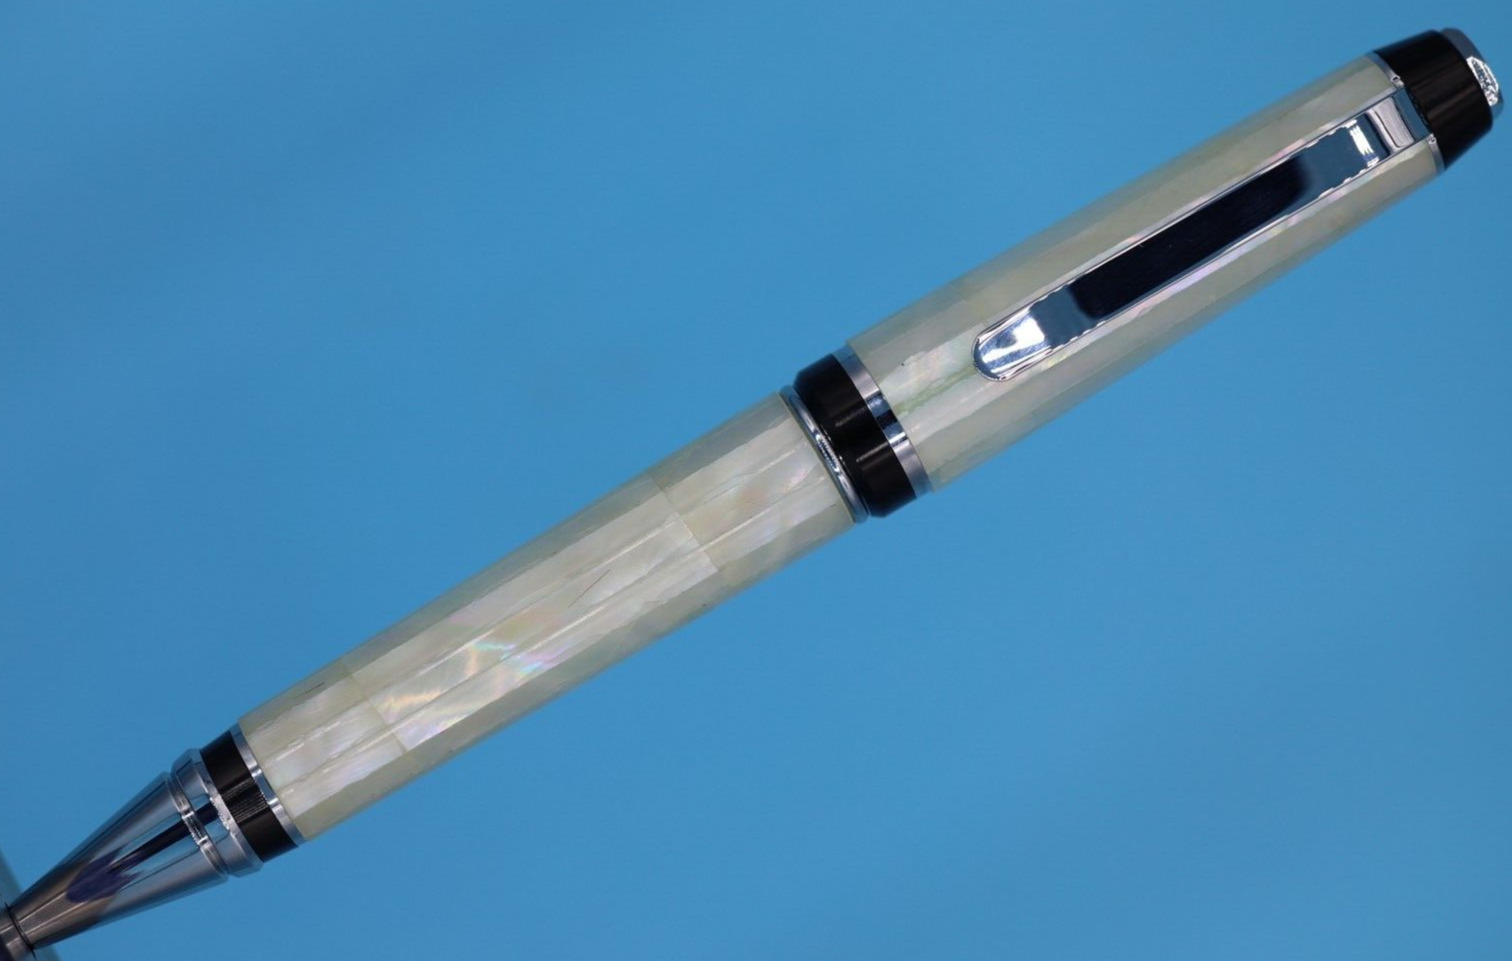 Double Twist (Cigar) Pen  in Chrome Trim Abalone Shell Mother of Pearl MOP